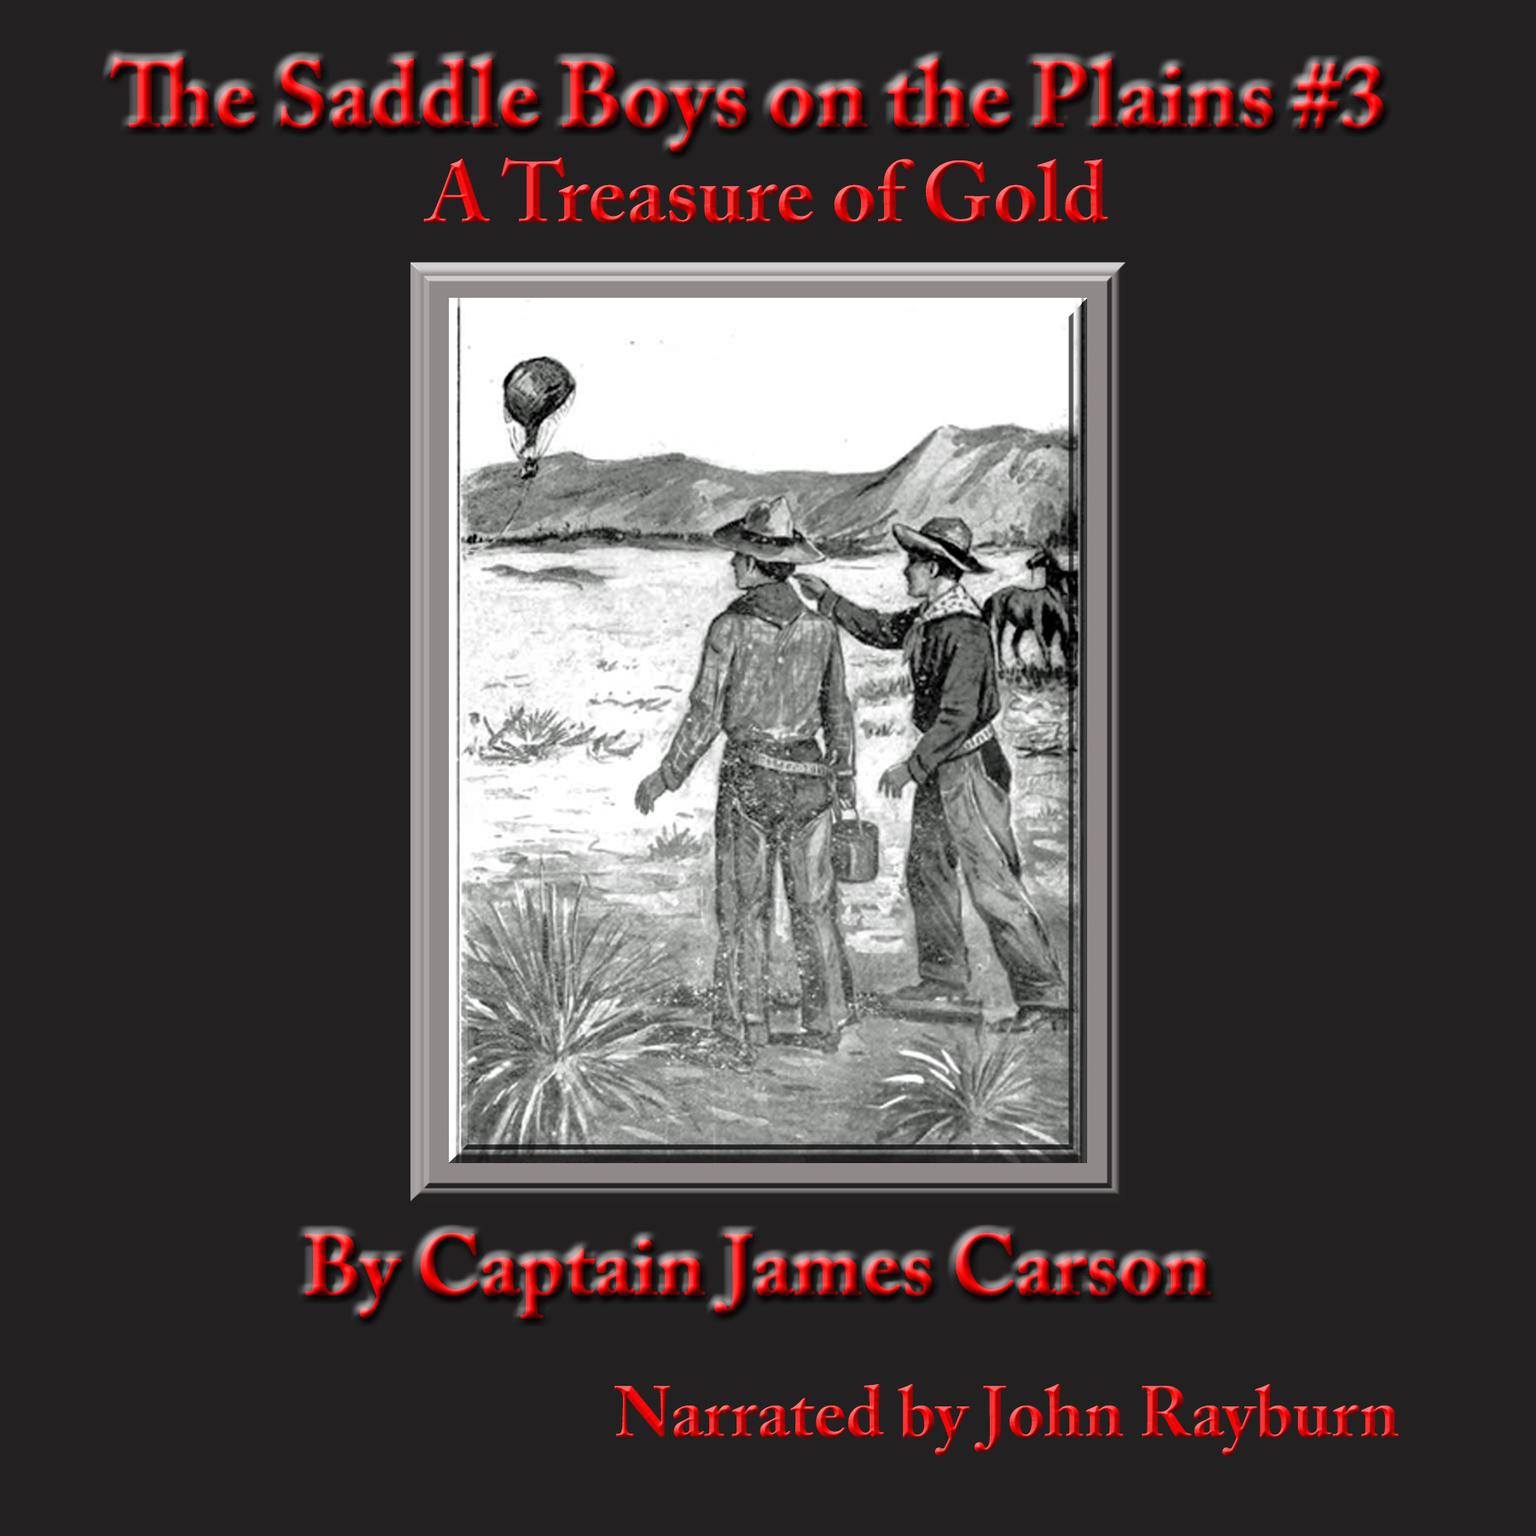 The Saddle Boys on the Plains: After a Treasure of Gold Audiobook, by Captain James Carson